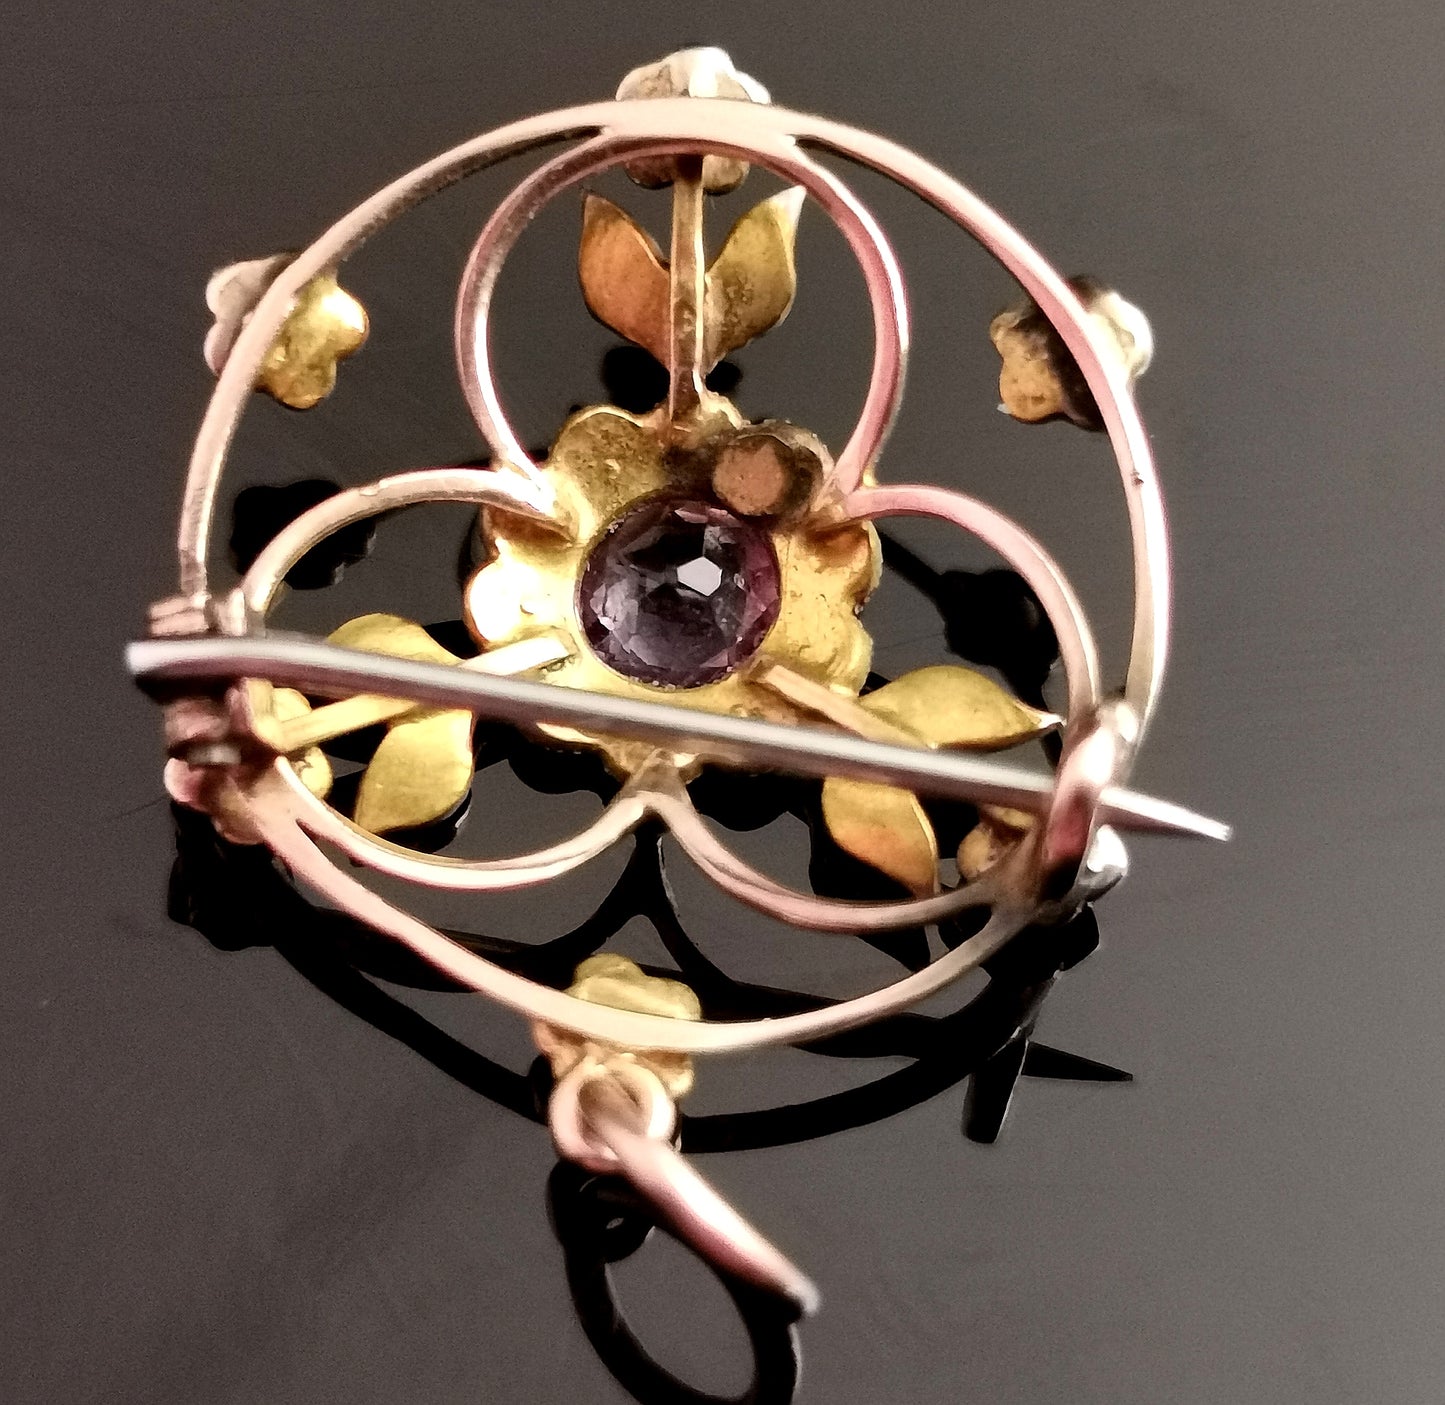 Antique Art Nouveau Amethyst and pearl pendant brooch, floral, 9ct gold